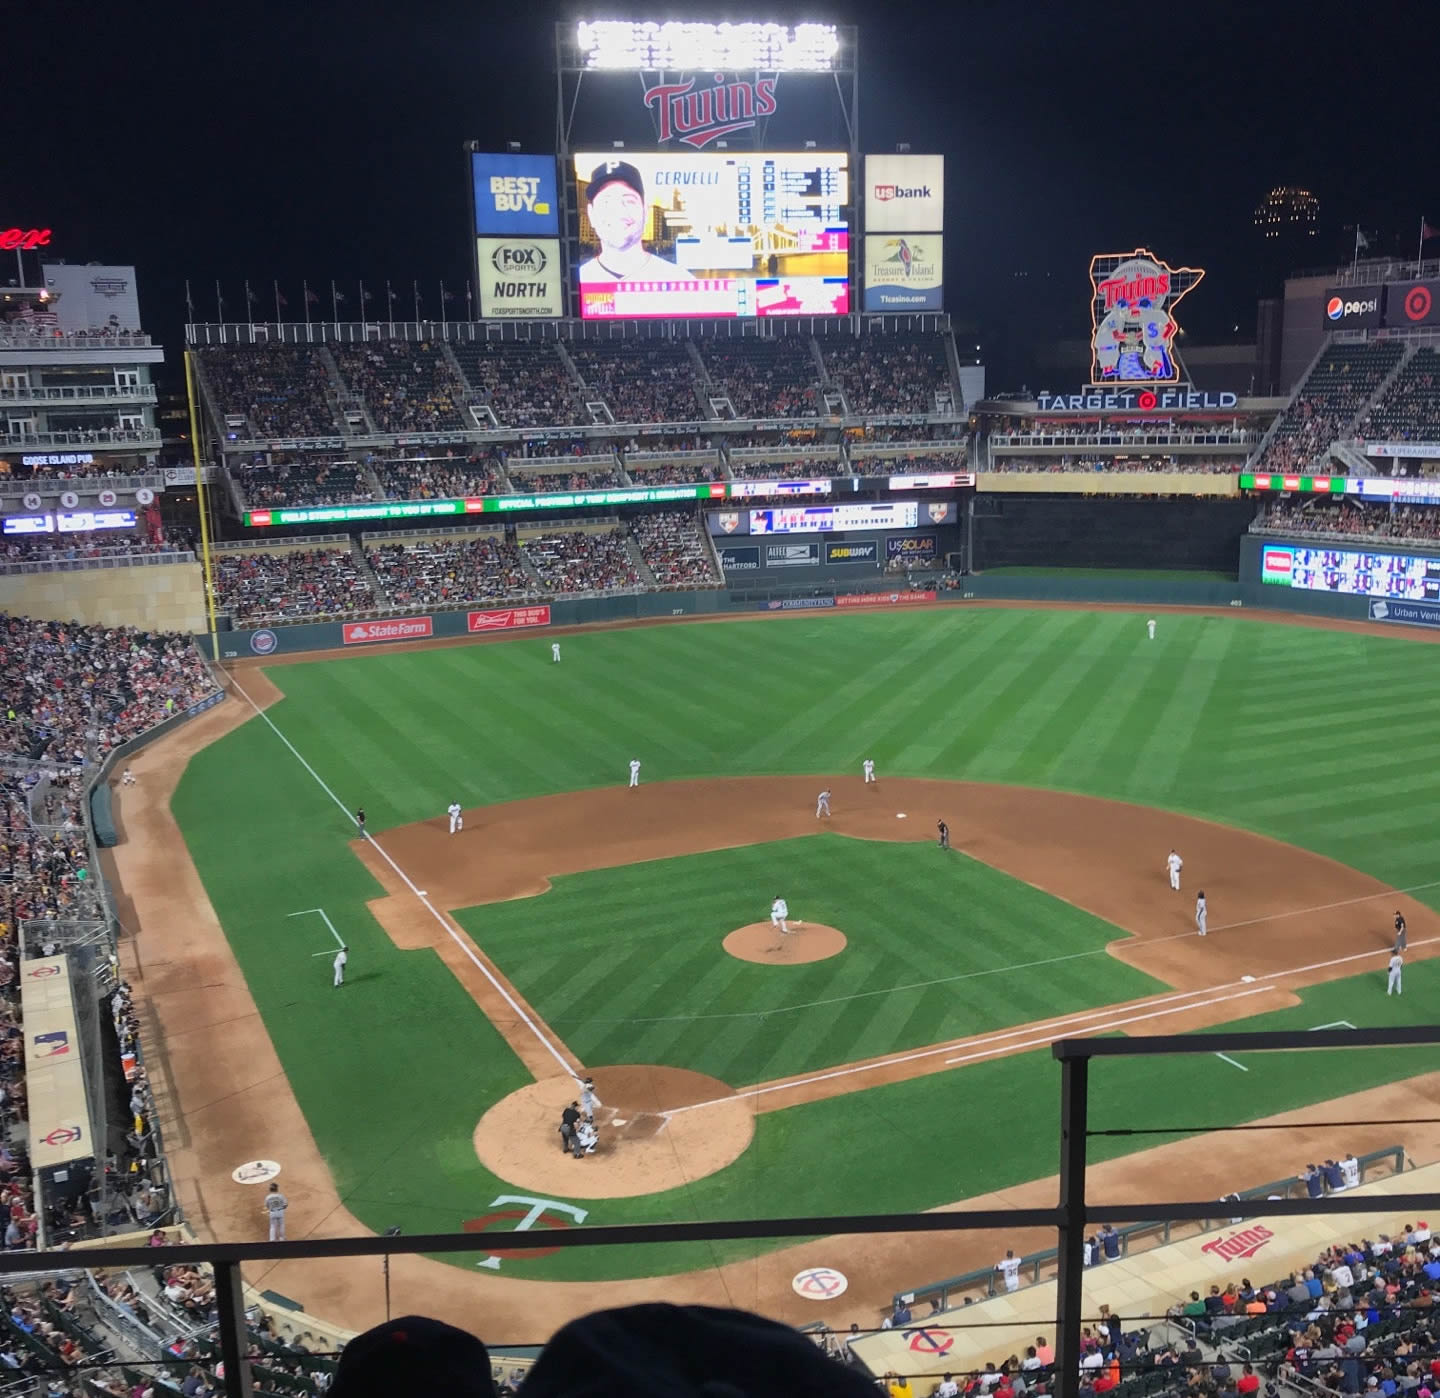 Section 313 at Target Field - RateYourSeats.com